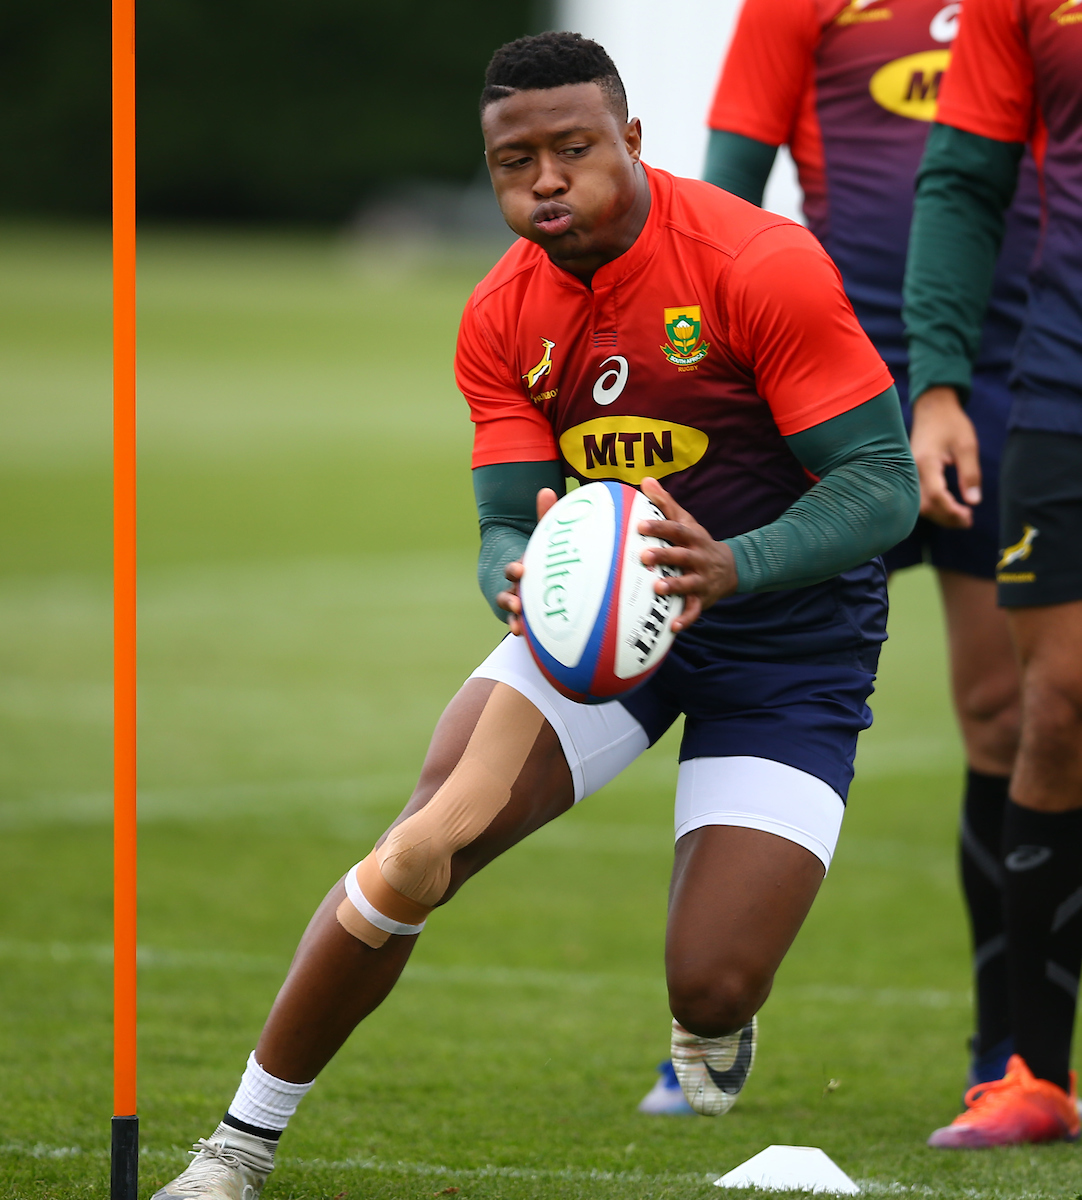 Aphiwe Dyantyi during the South African national rugby team training session 